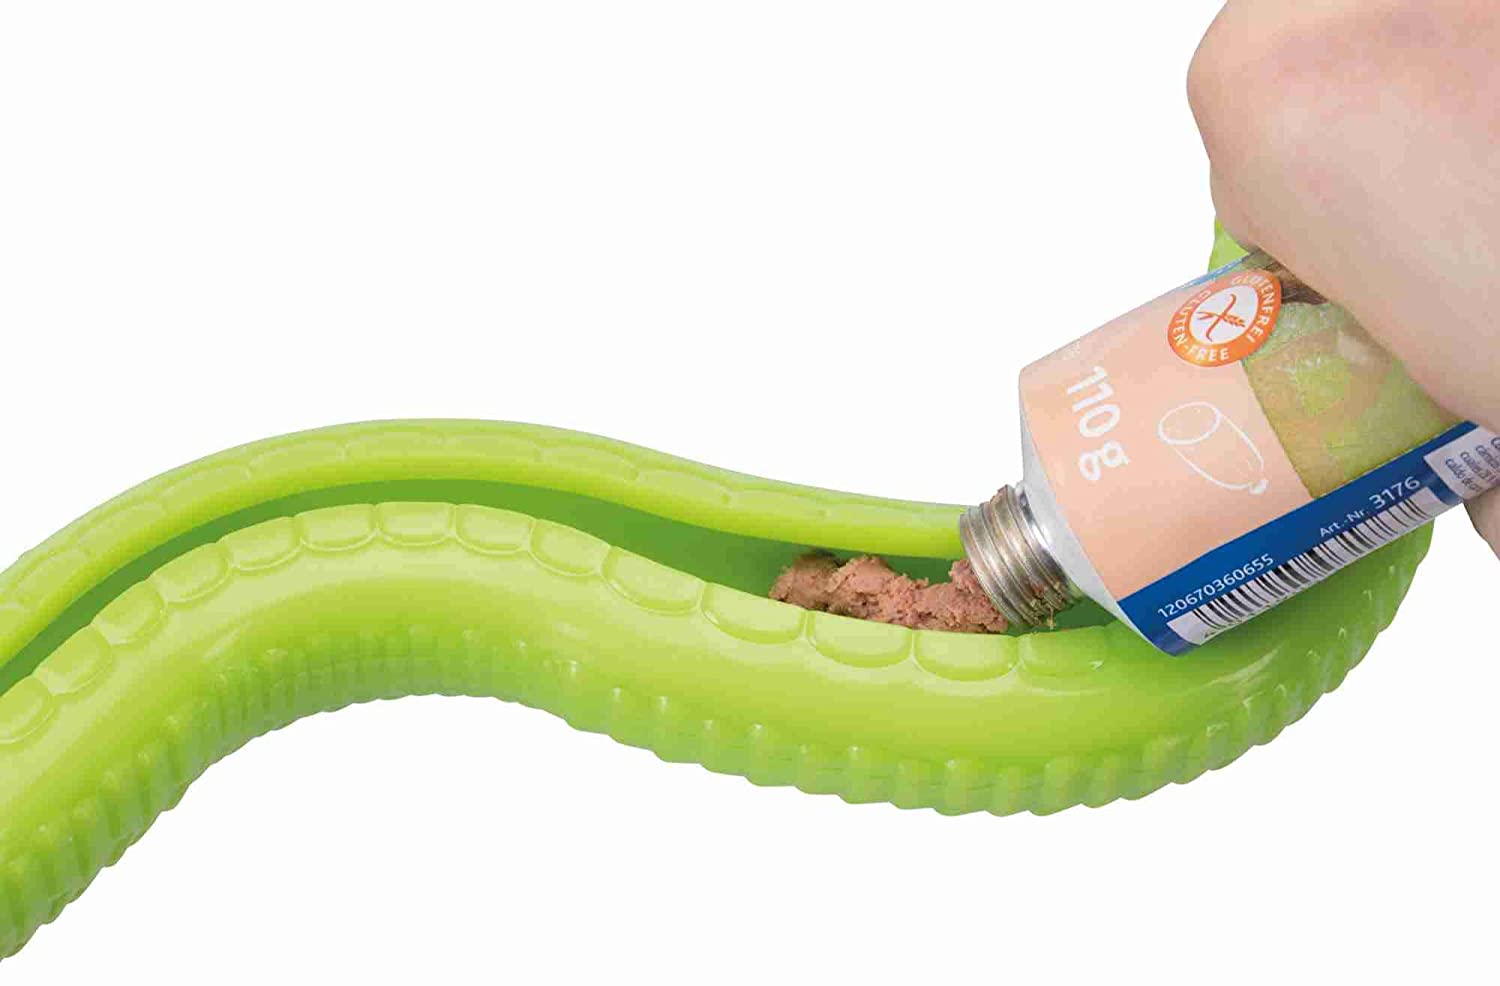 TRIXIE Snack Thermoplastic Rubber Snake Pet Toy -42 cm